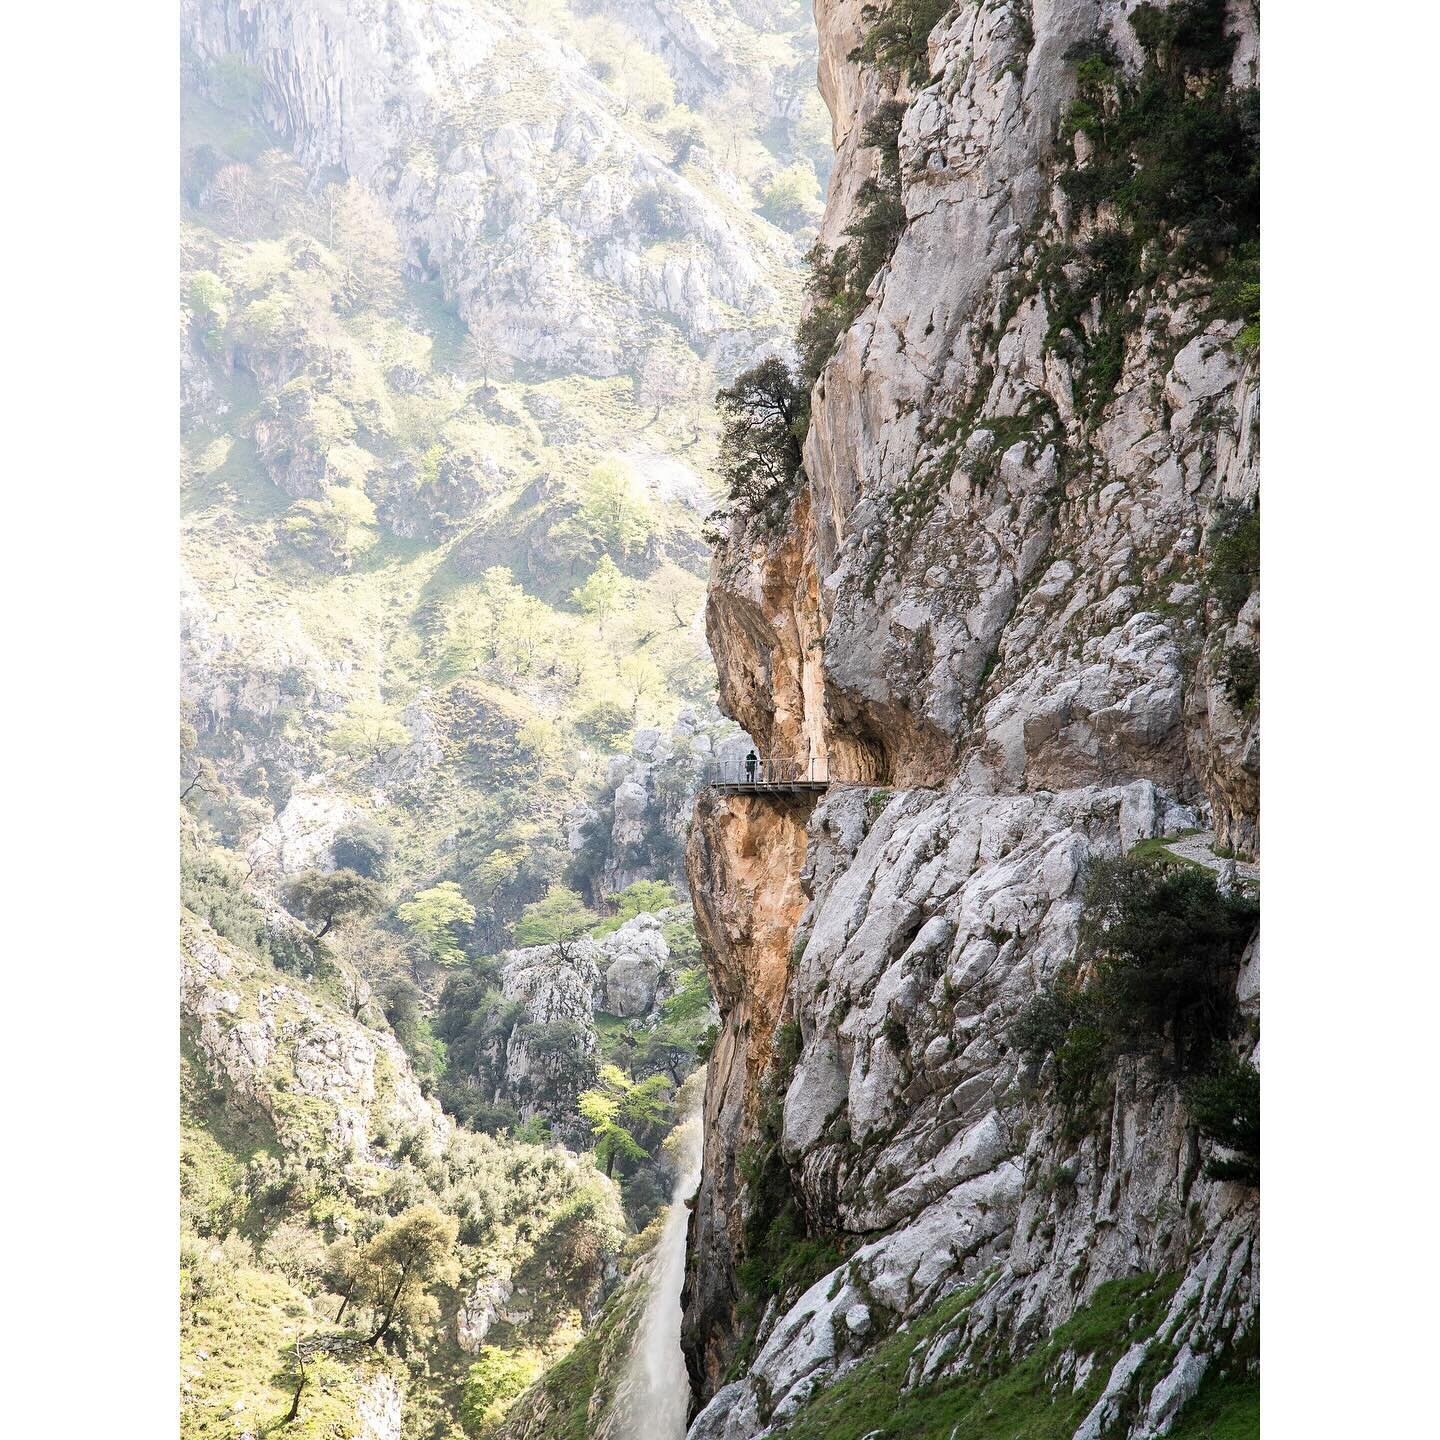 I'm reminiscing again today. These are from a hike we did in Spain a few years ago. We pretty much did the Cares Gorge by accident. We'd seen a few photos and decided it looked cool so head off on the 12km hike. Carved into the Picos de Europa mounta